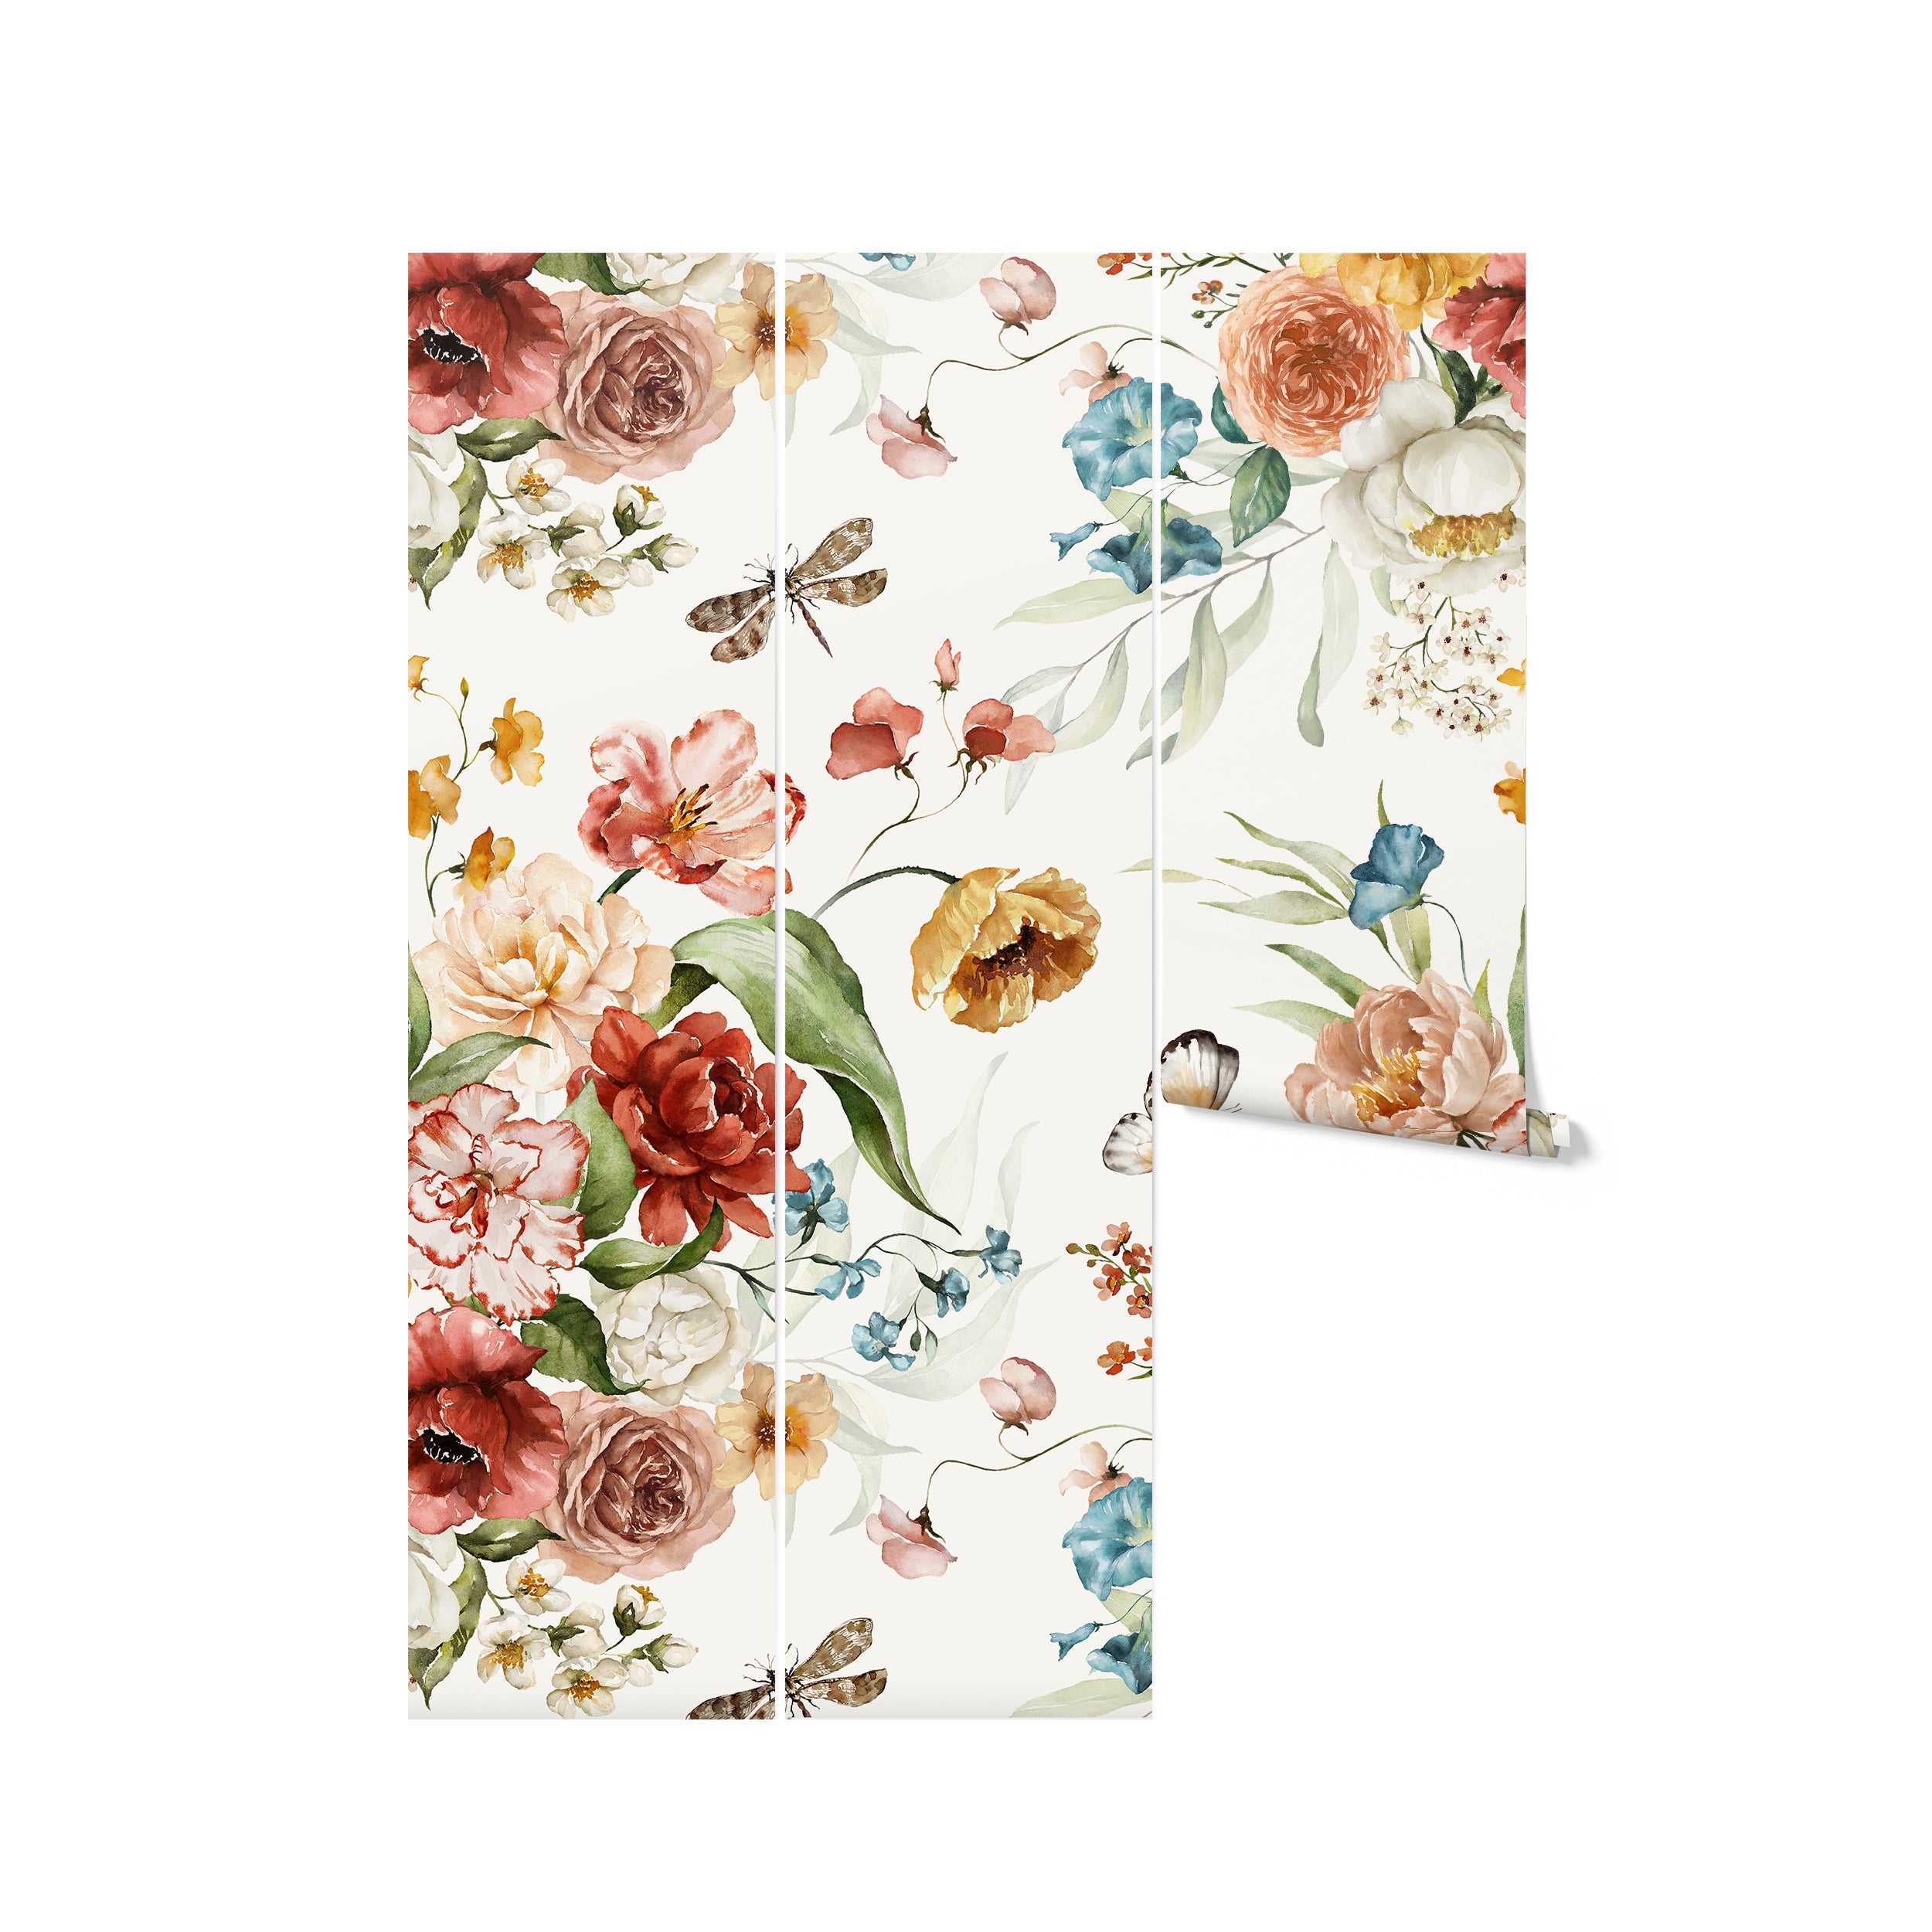 A roll of vibrant floral wallpaper showcasing a watercolor design of various flowers, including roses and peonies, in shades of red, pink, yellow, blue, and white. The pattern is accented with green leaves and insects like butterflies and dragonflies, all set against an off-white background.